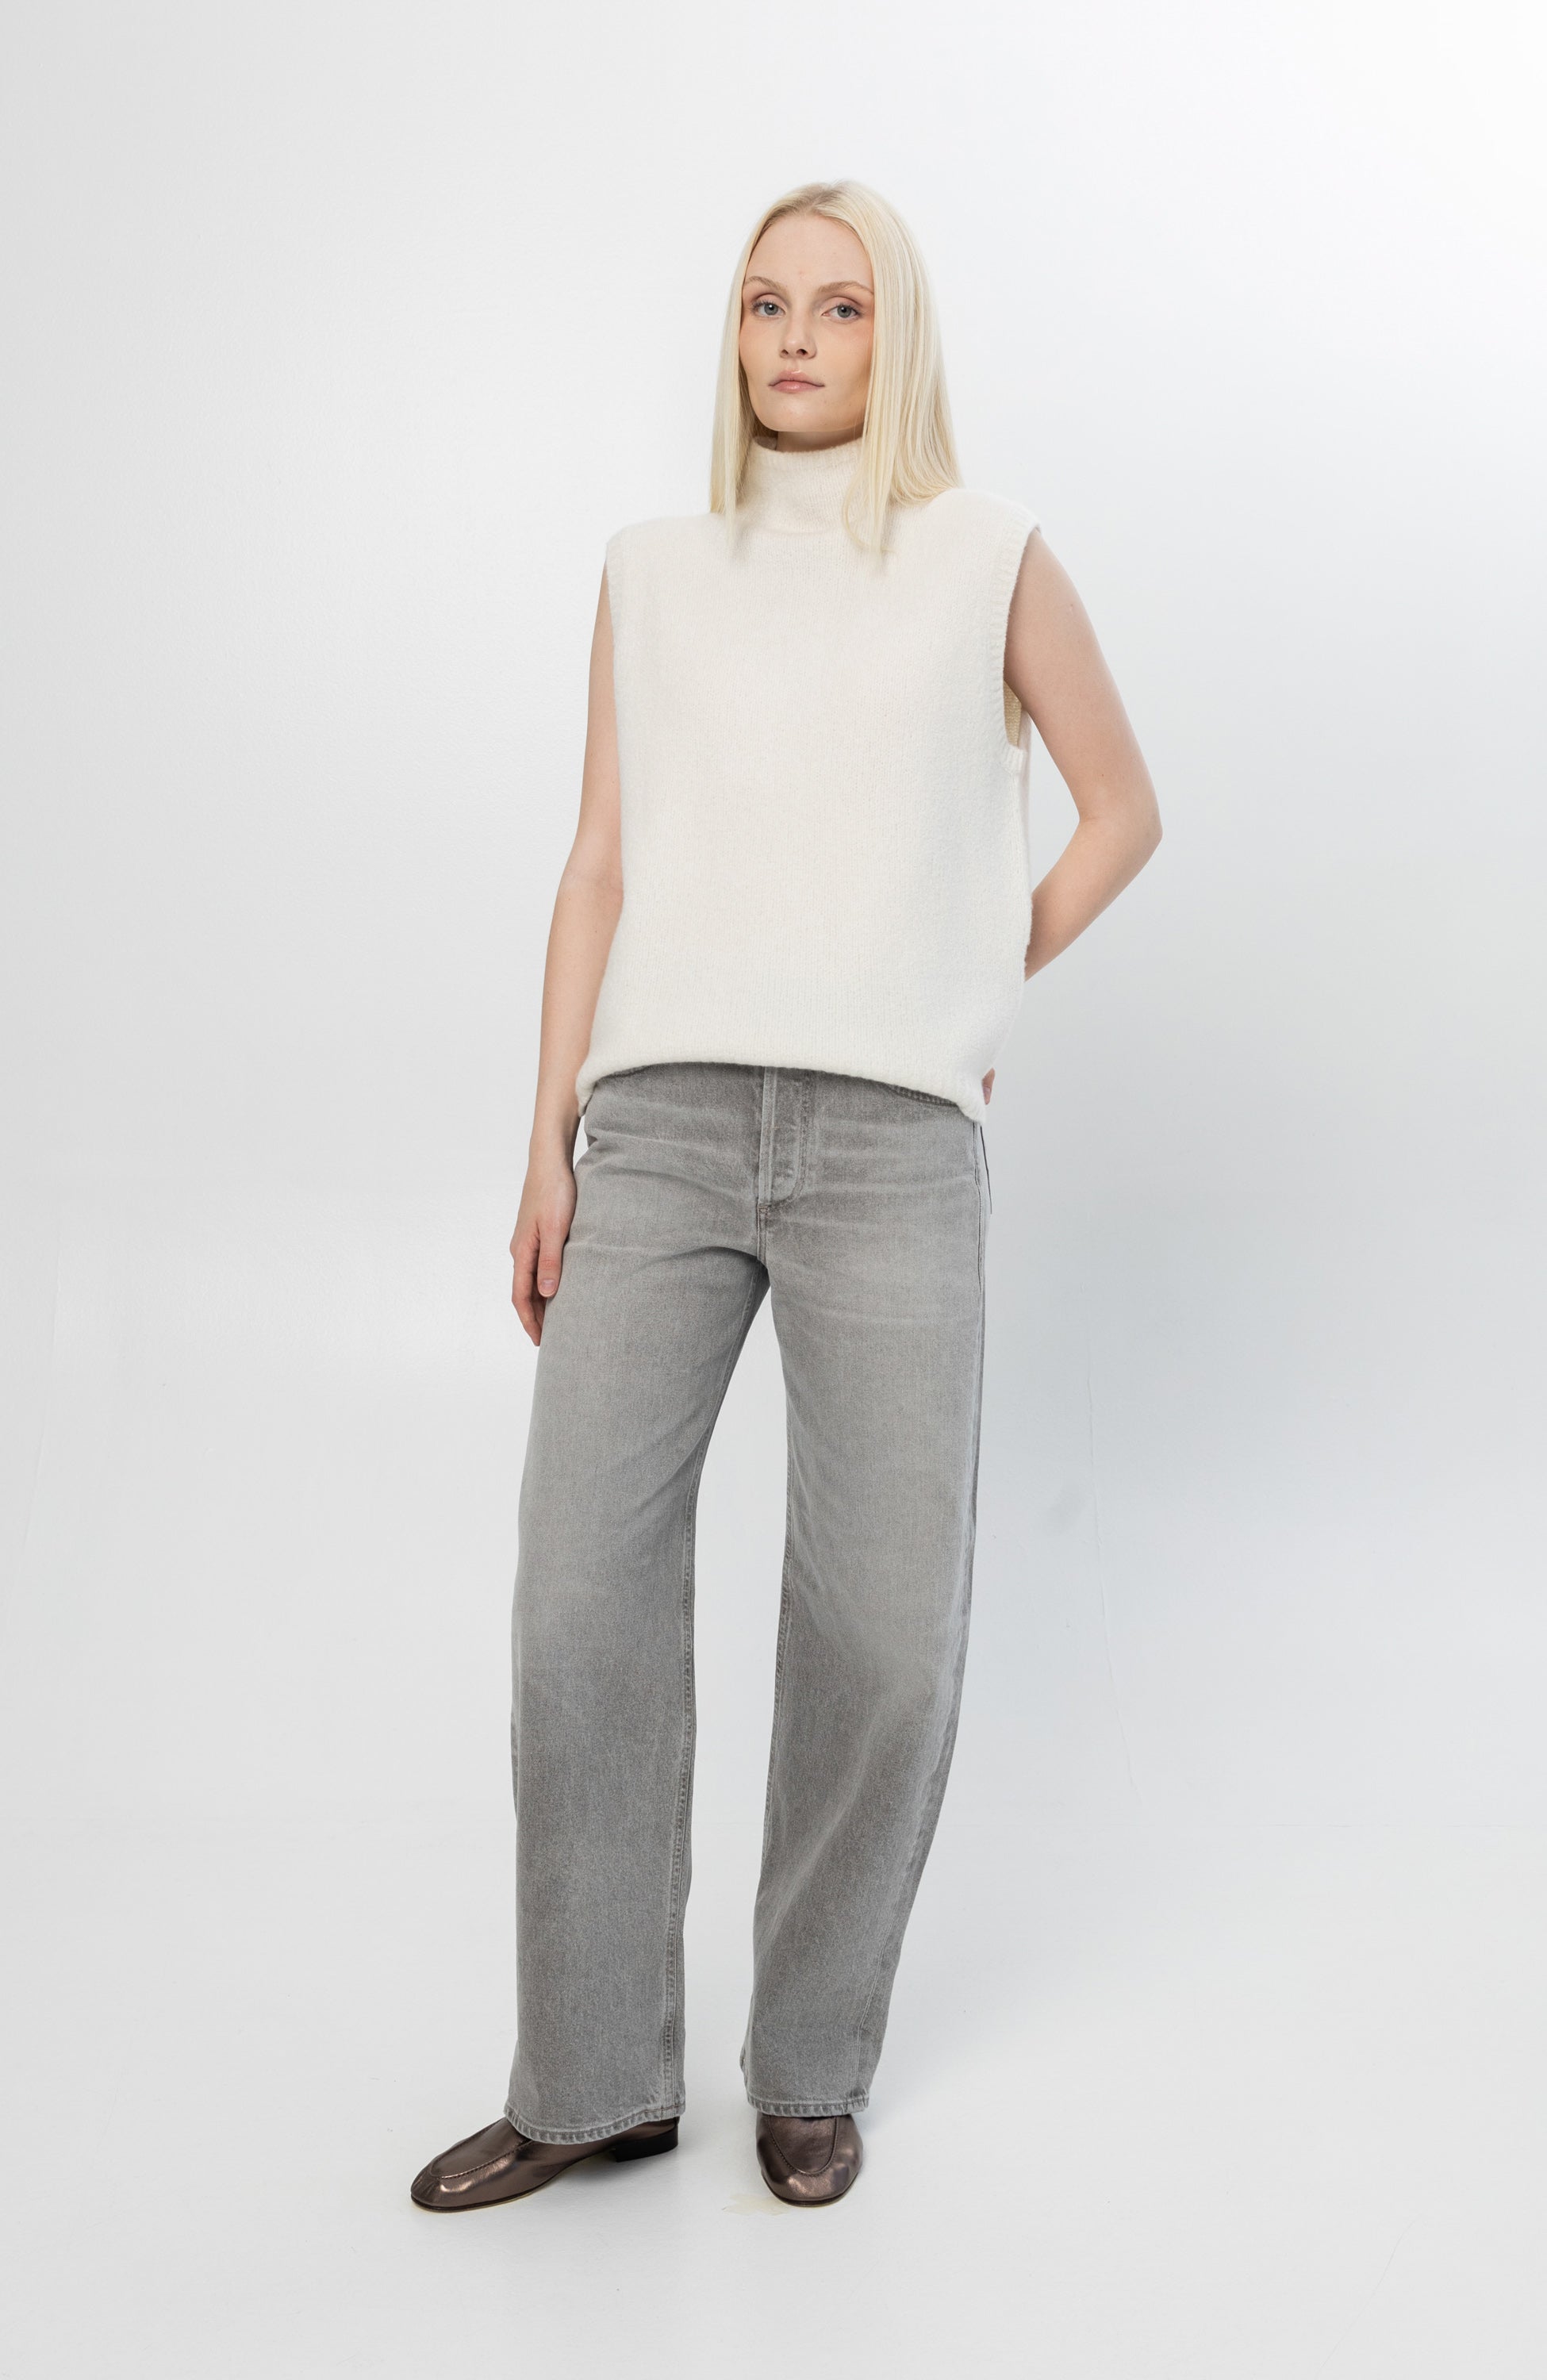 Citizens of humanity Grey Relaxed baggy jeans ayla